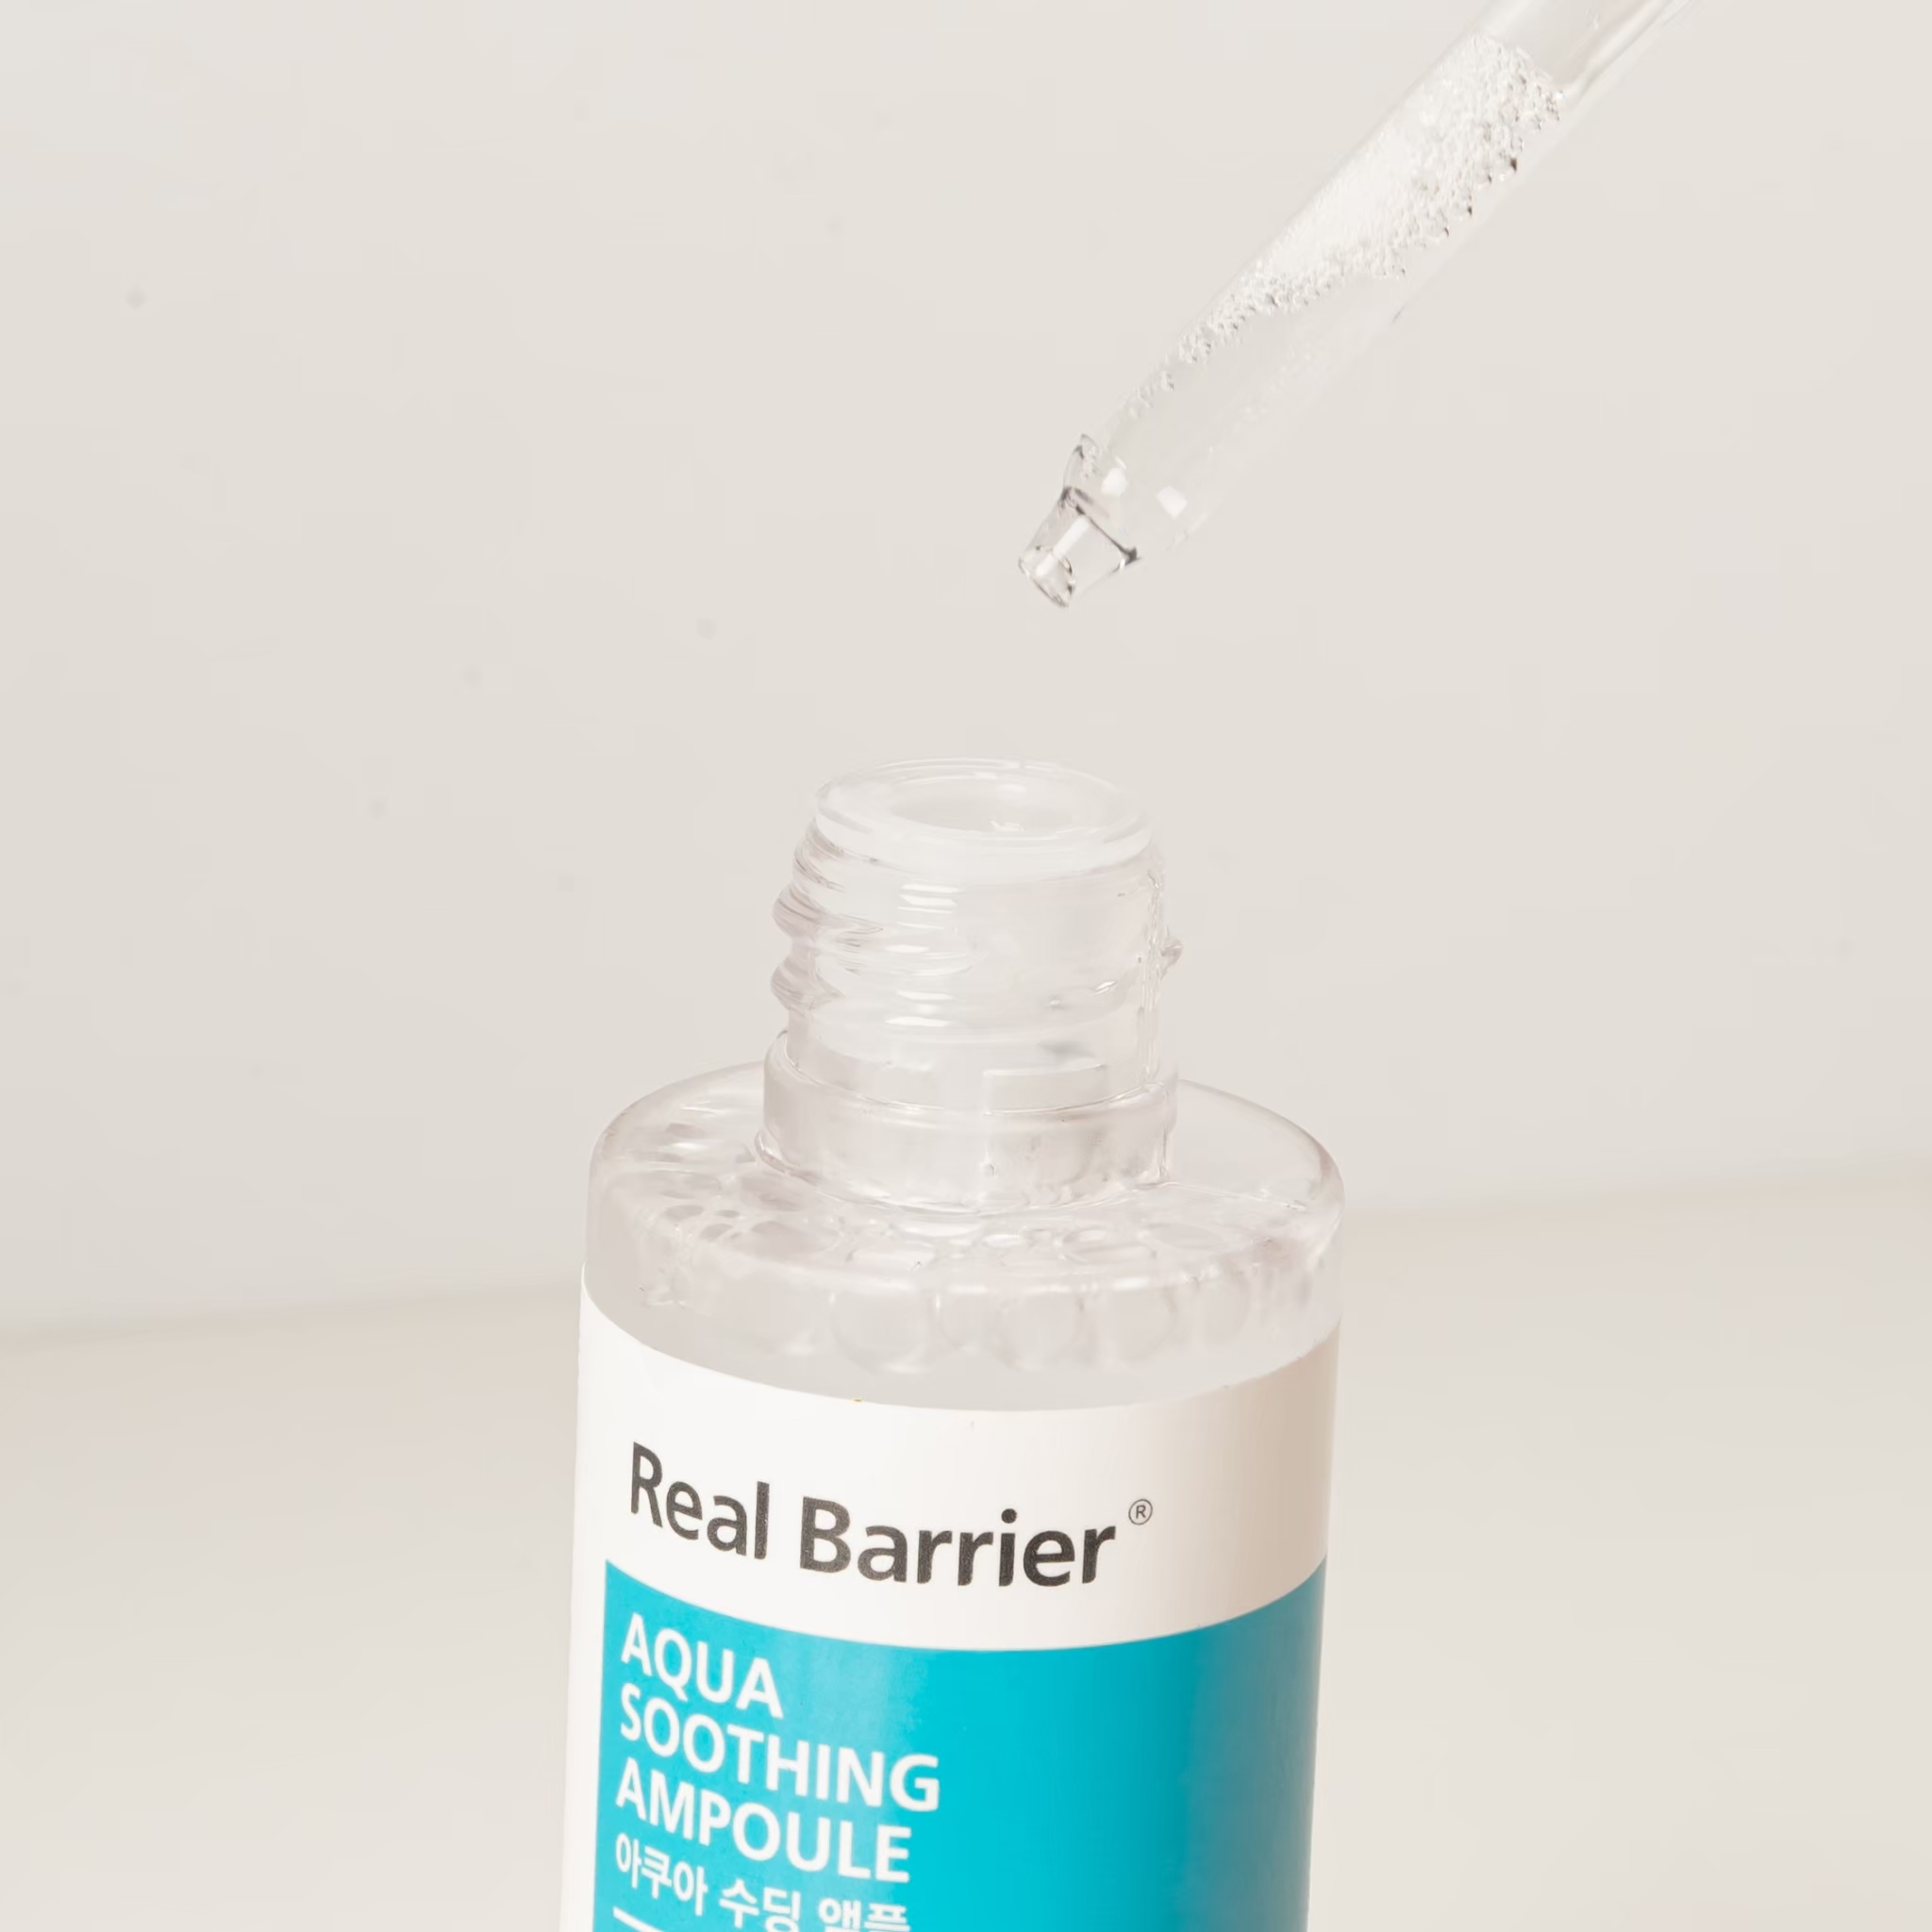 Real Barrier Aqua Soothing Ampoule 23784035 - фото 5